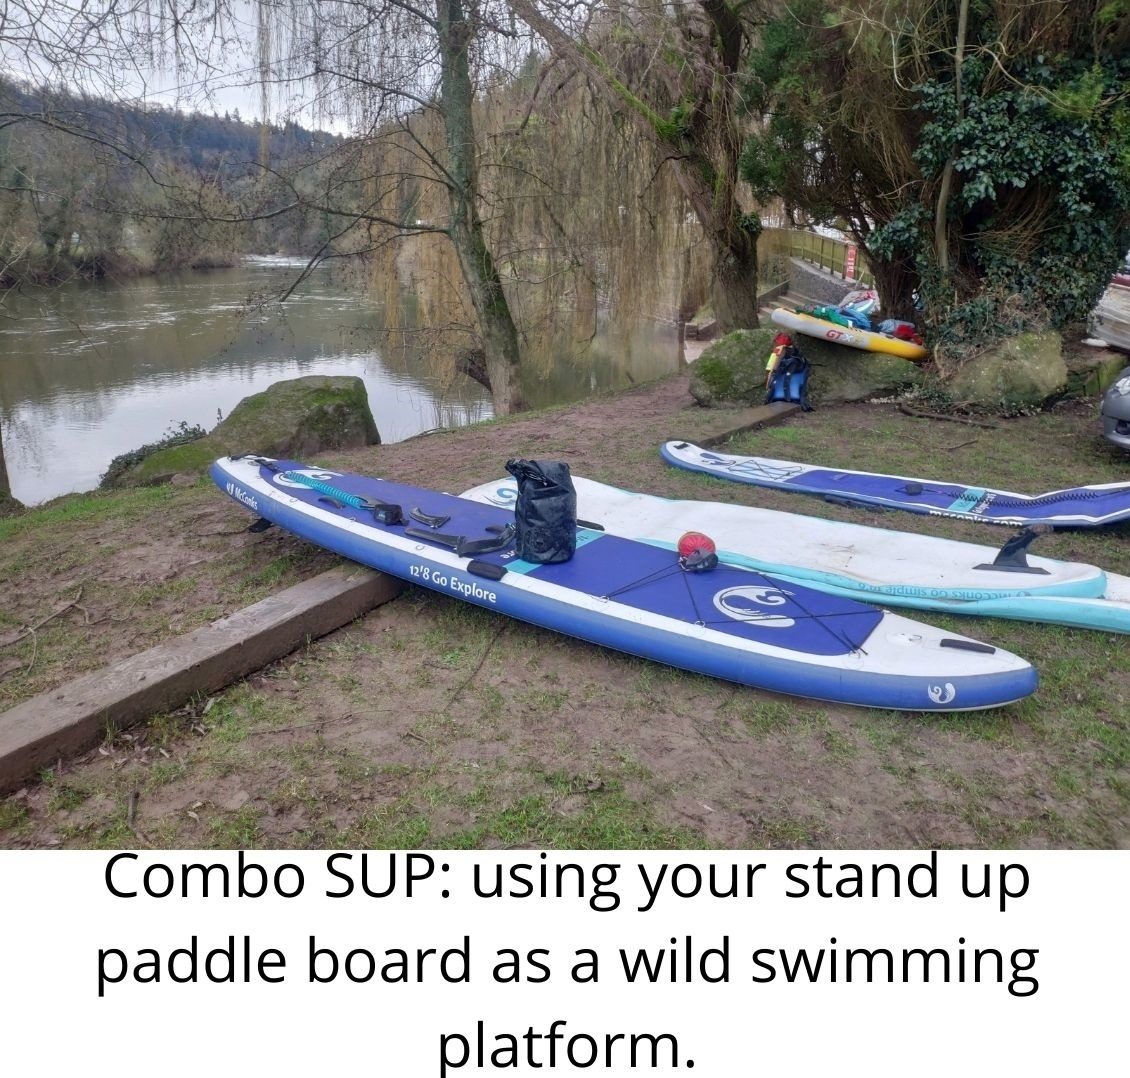 You are currently viewing Combo SUP: using your stand up paddle board as a wild swimming platform.